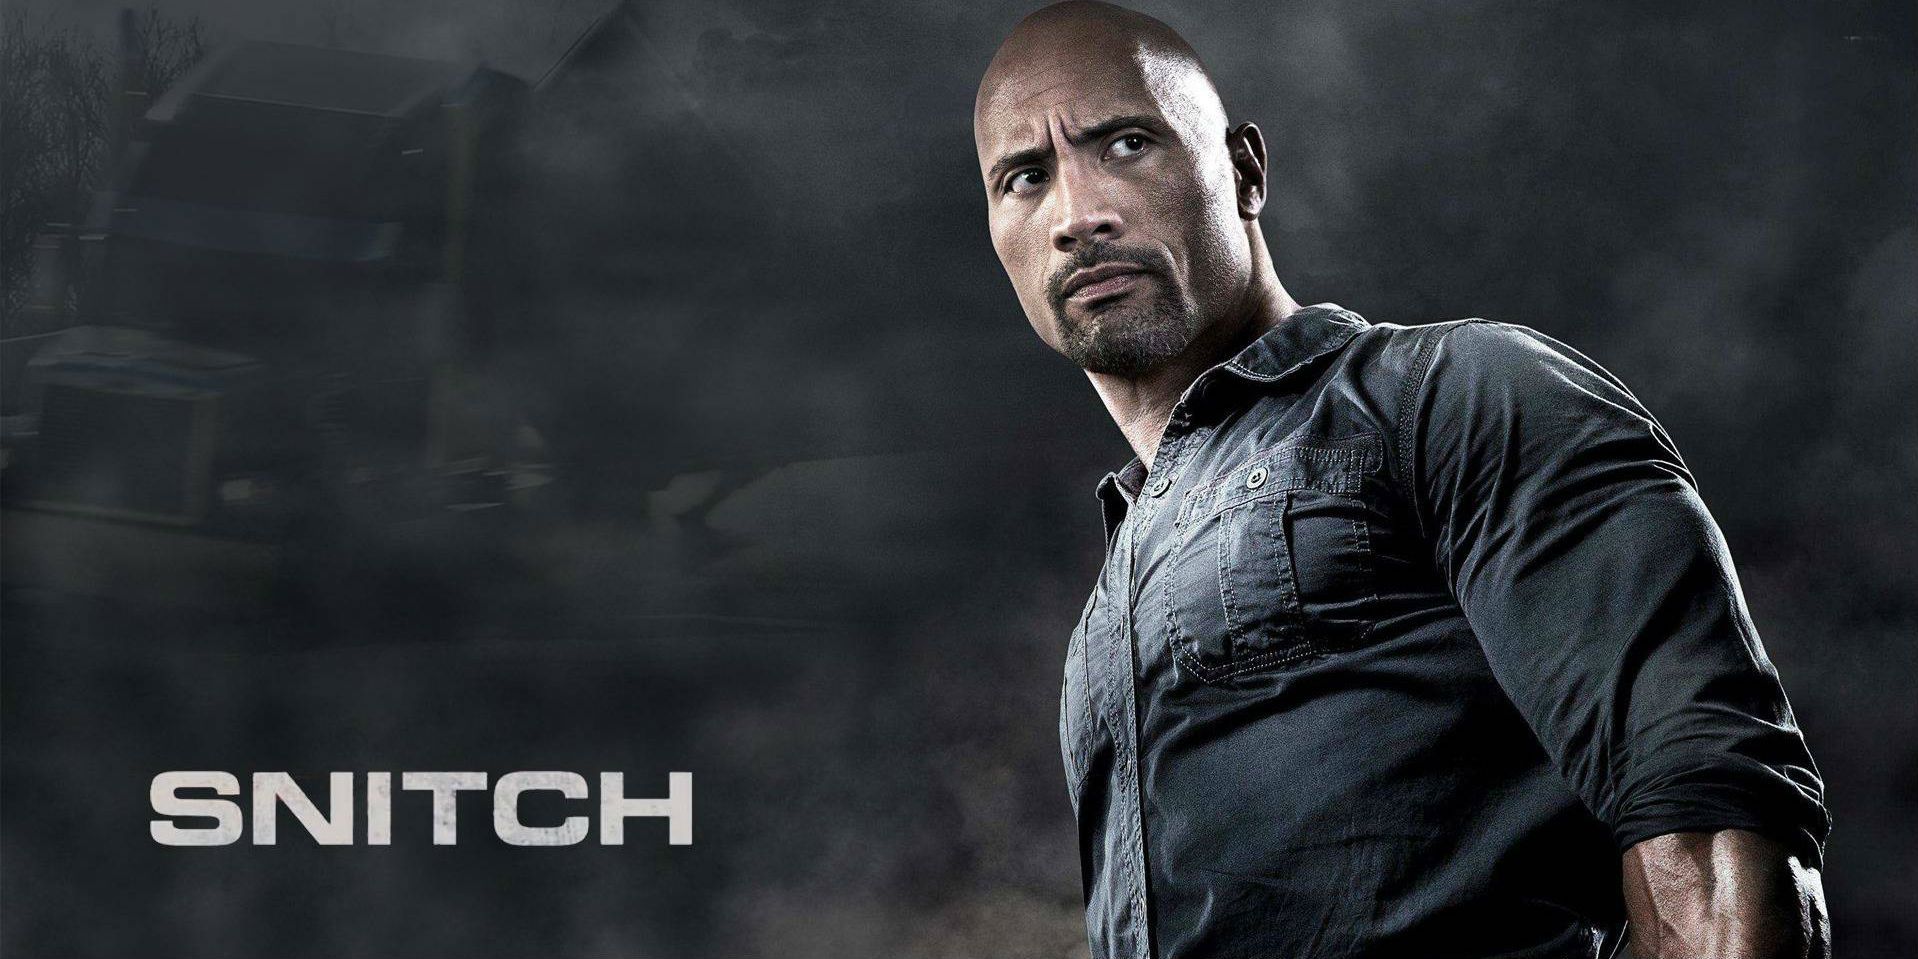 The Rock in Snitch